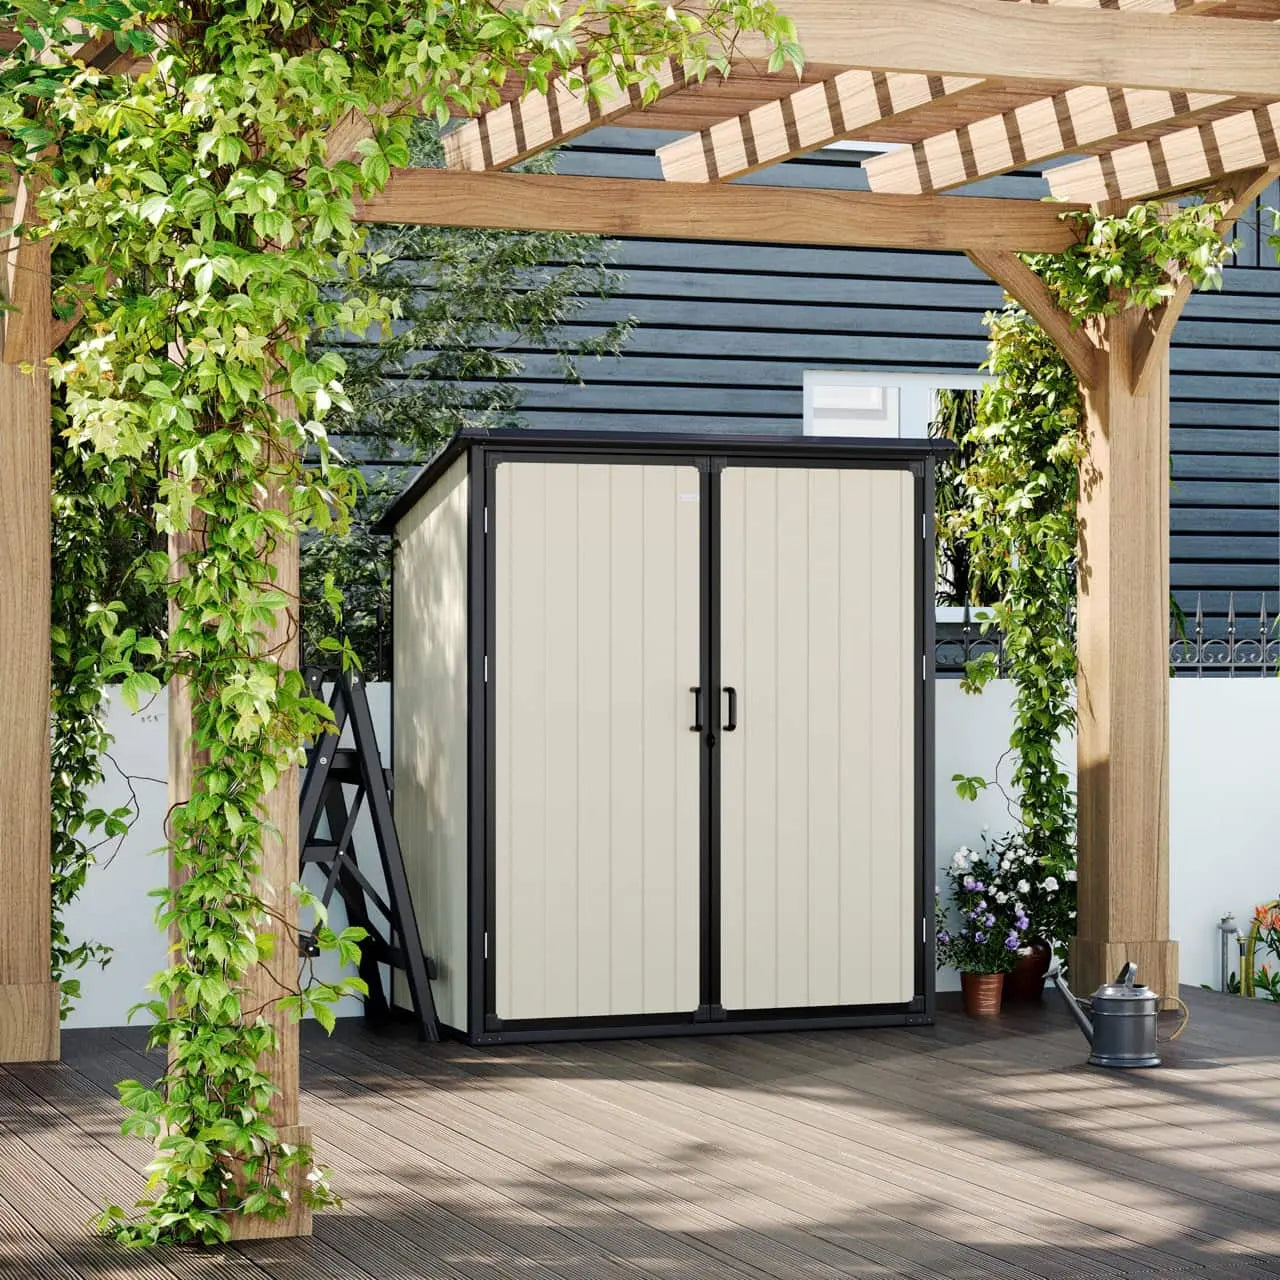 Patiowell 4x2 Plastic Vertical Shed Pro